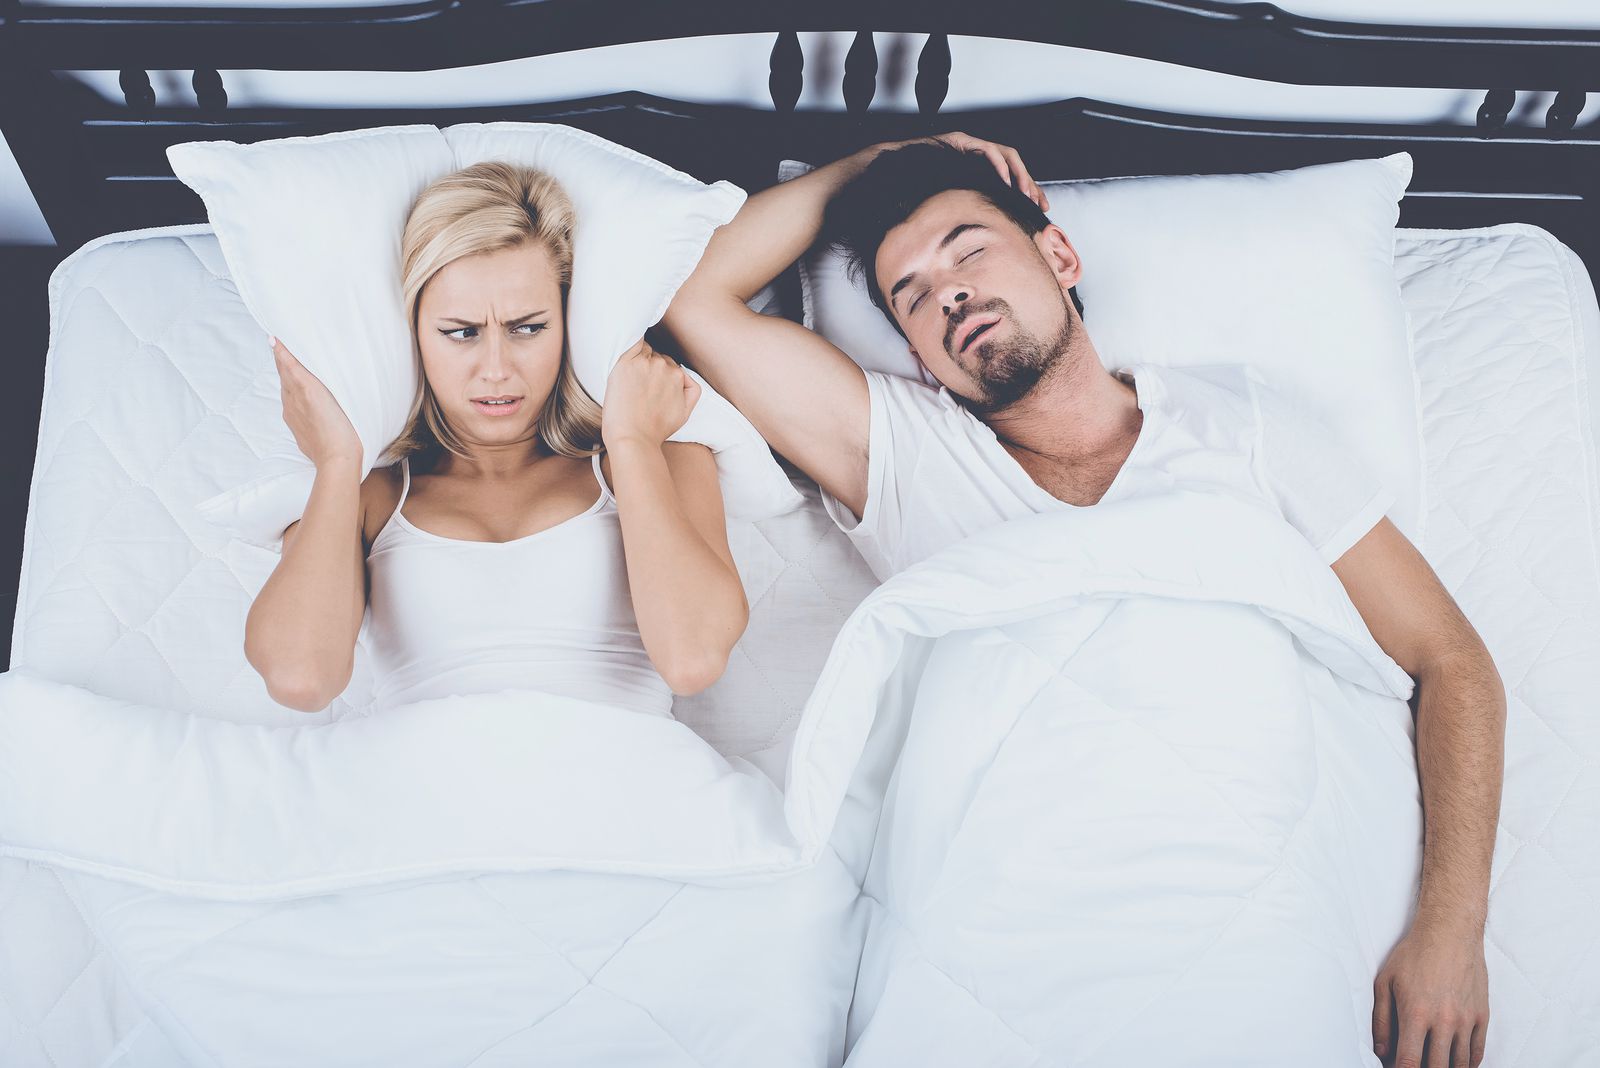 Snoring Keeping Others Up At Night How Sleep Apnea May Be The Cause